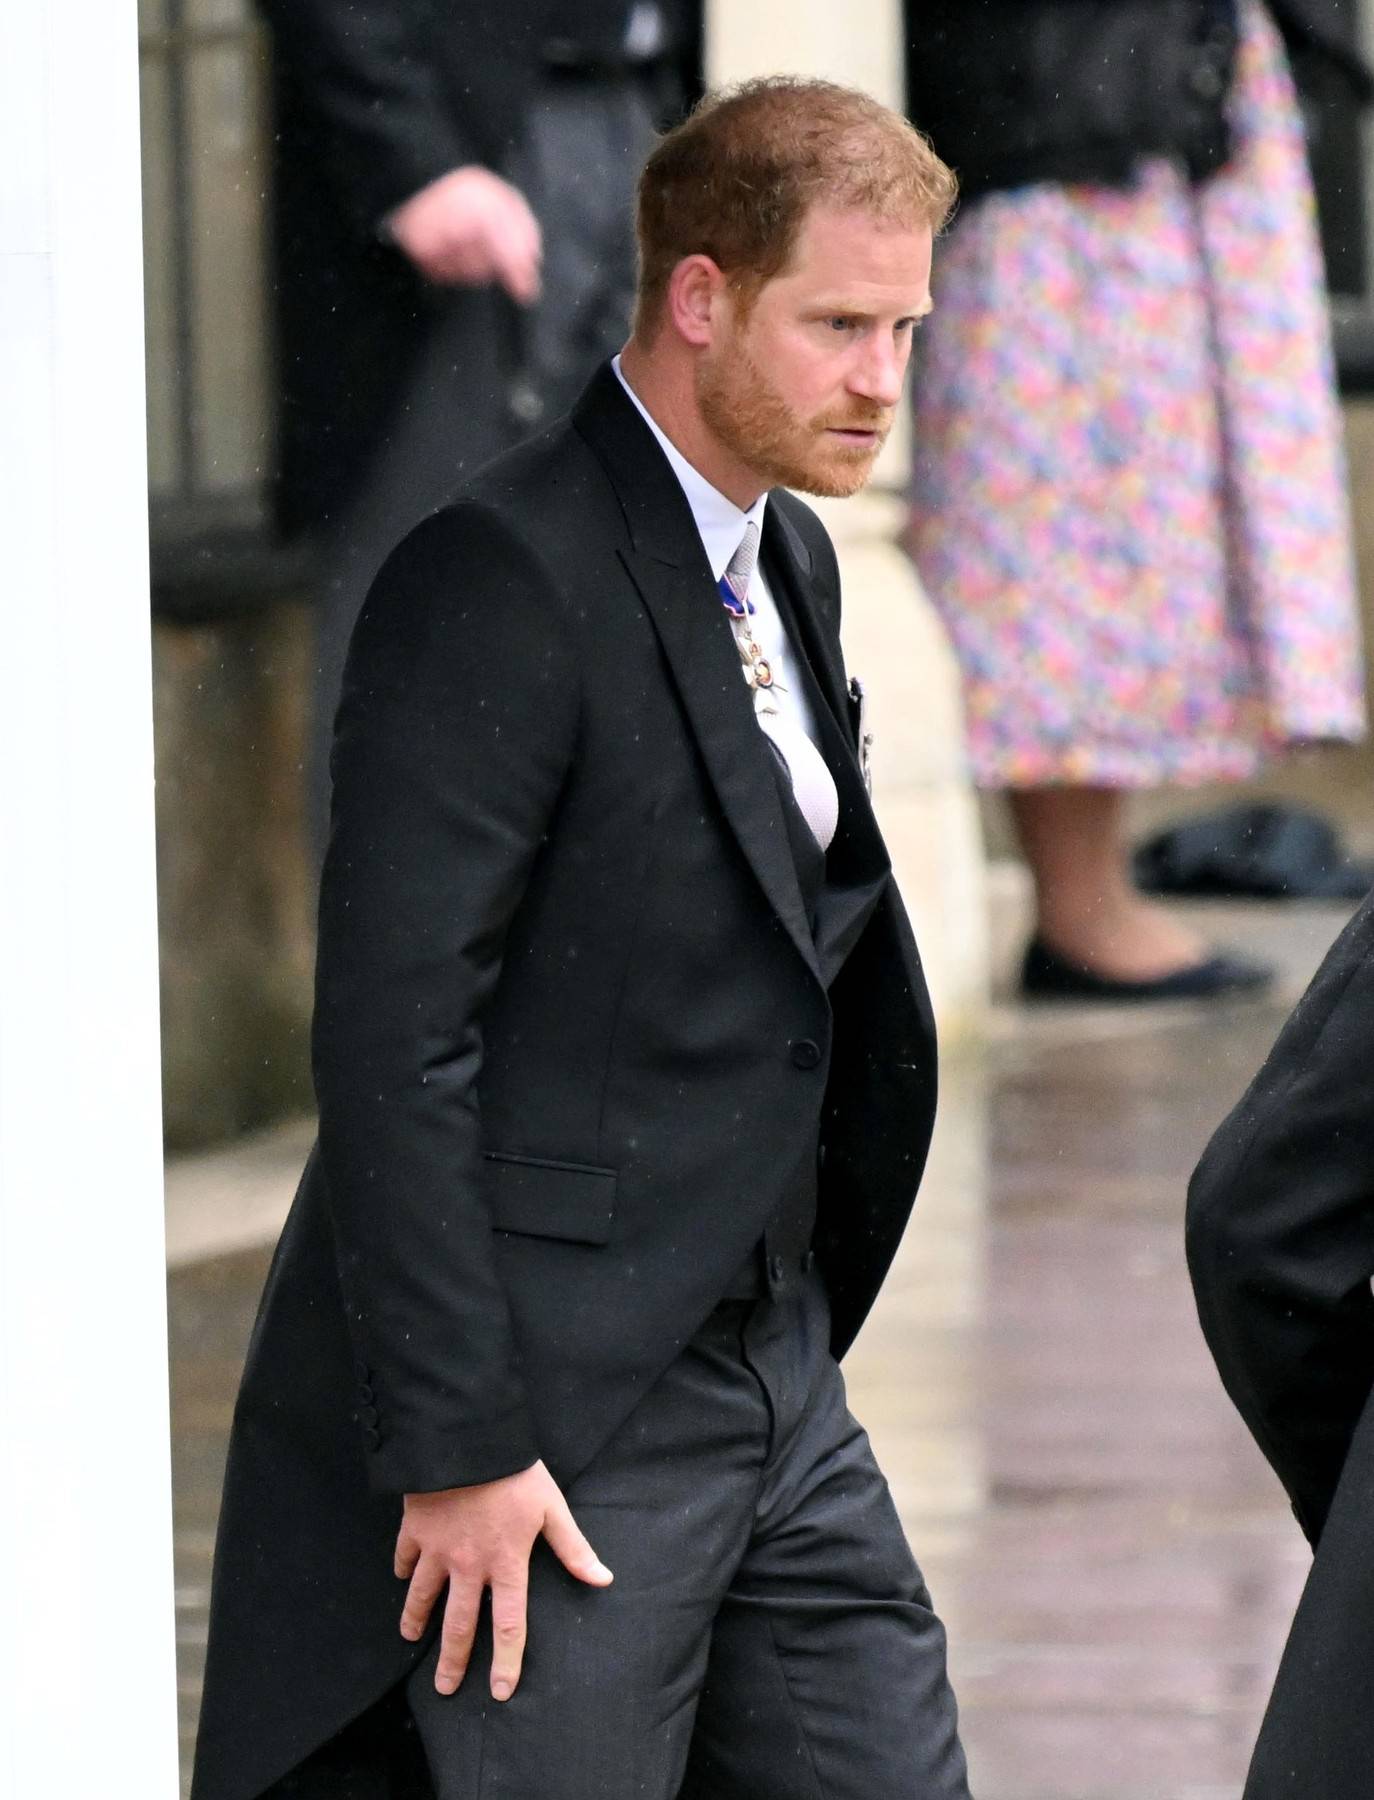 Prince Harry pictured departing Westminster Abbey after attending his father King Charles III Coronation.